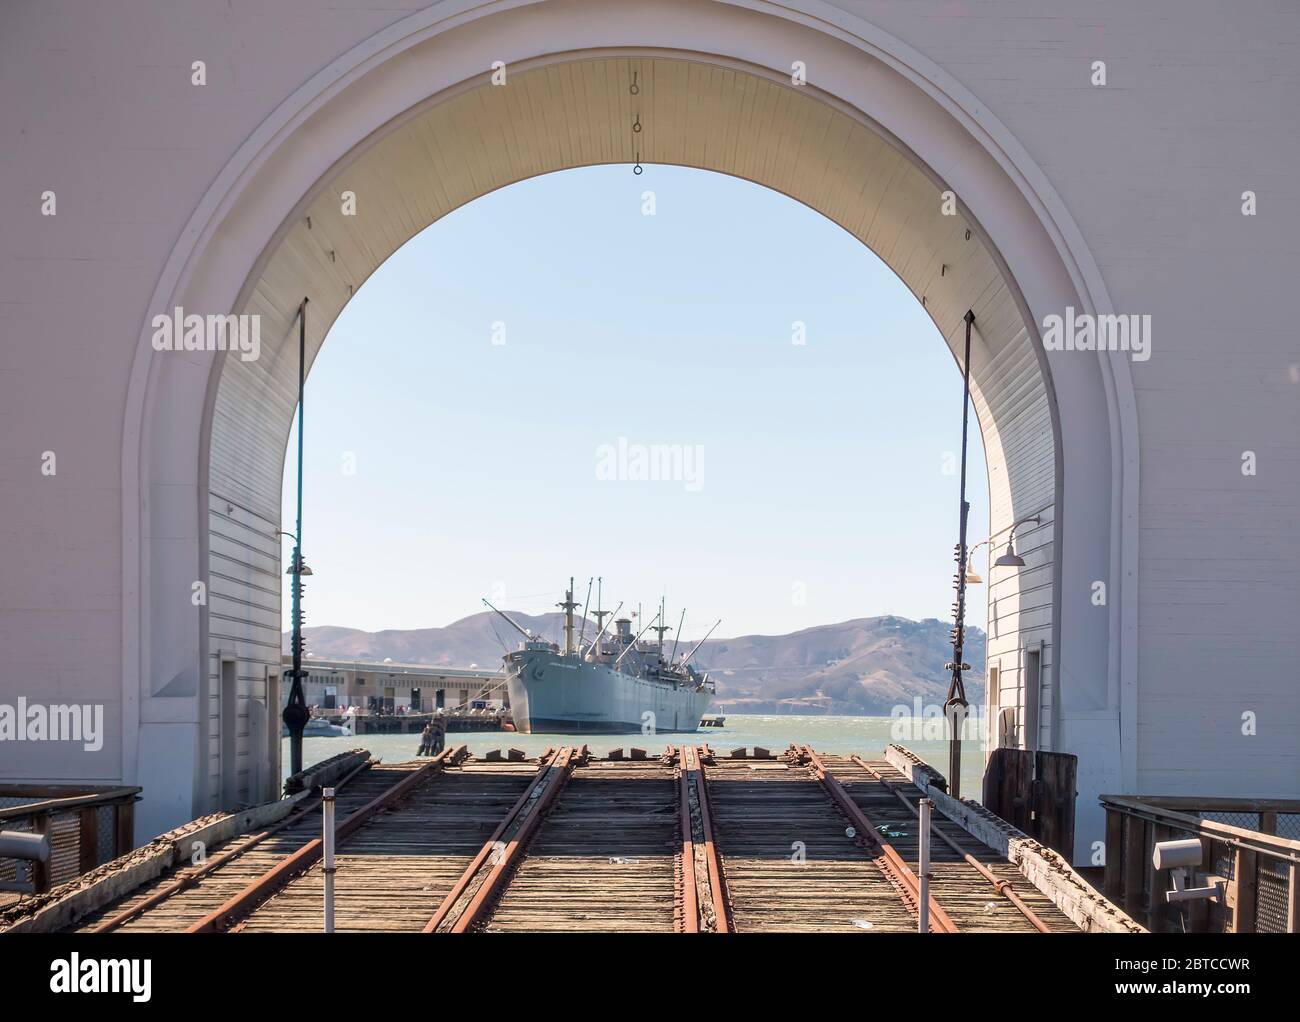 Liberty ship SS Jeremiah O'Brien at Pier 45, San Francisco, California, USA before the fire of May 2020 that destroyed part of the pier Stock Photo